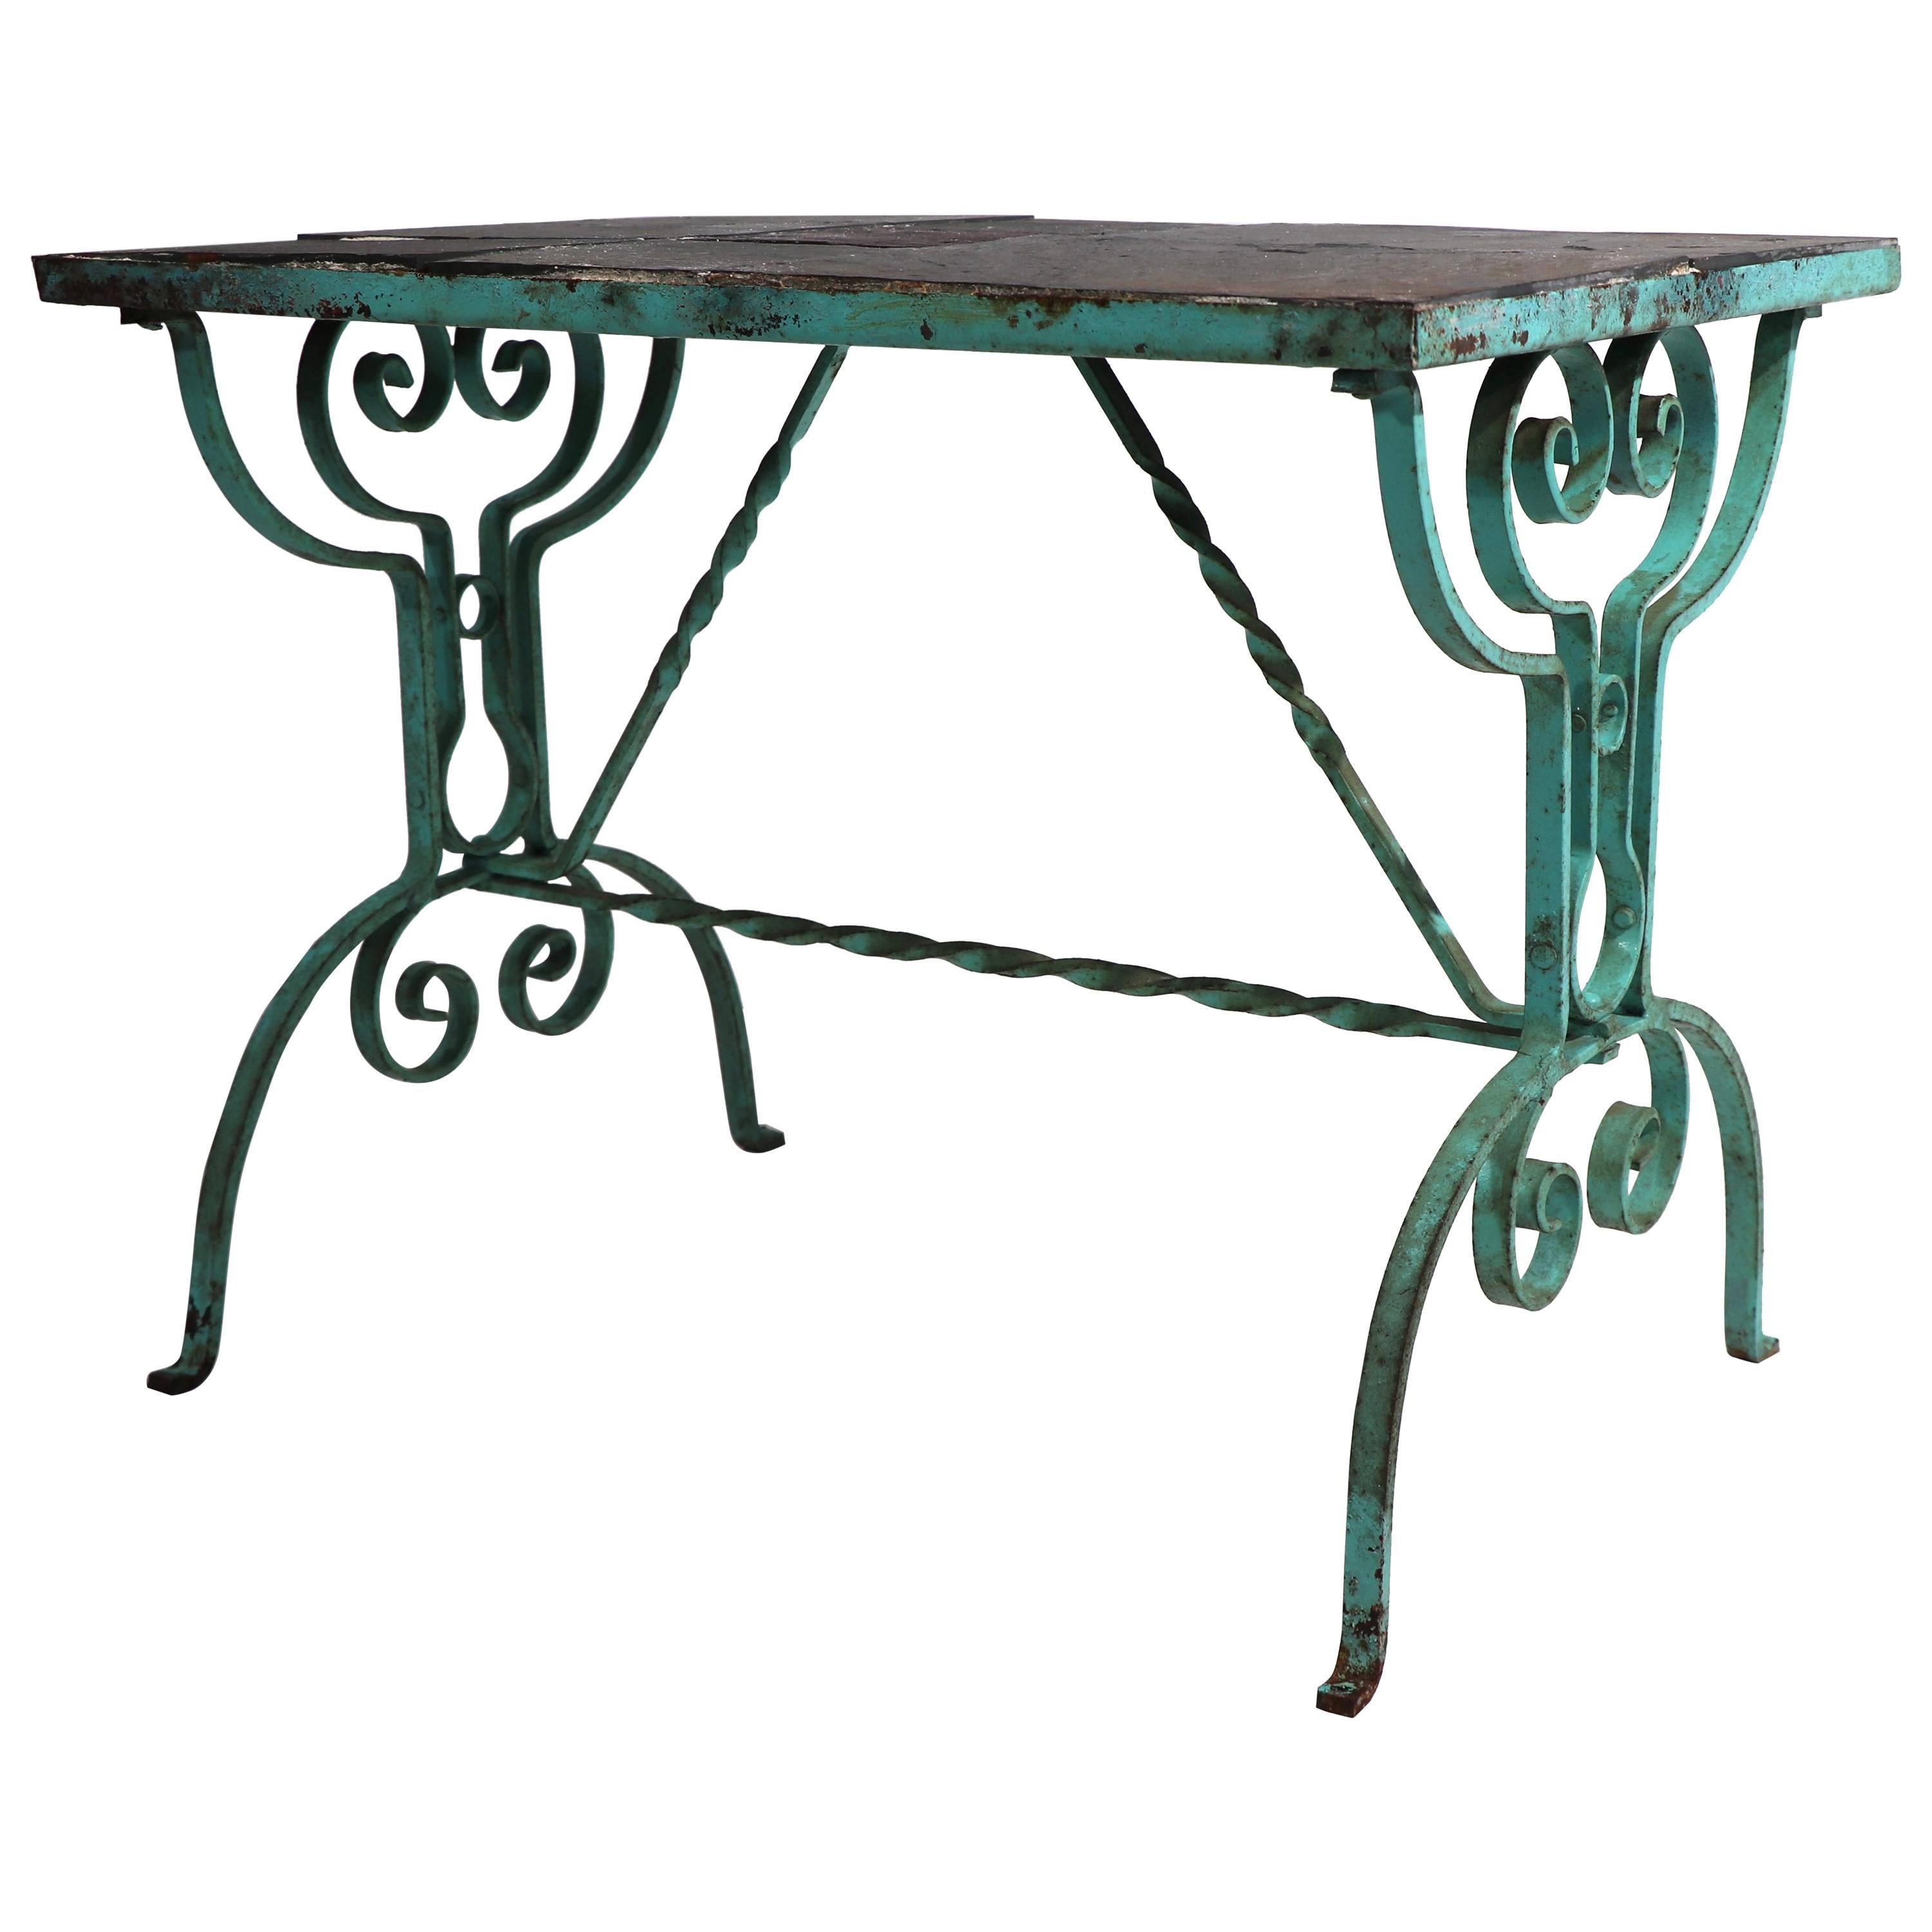 Art Deco Arts and Crafts Wrought Iron and Slate Garden Patio Table